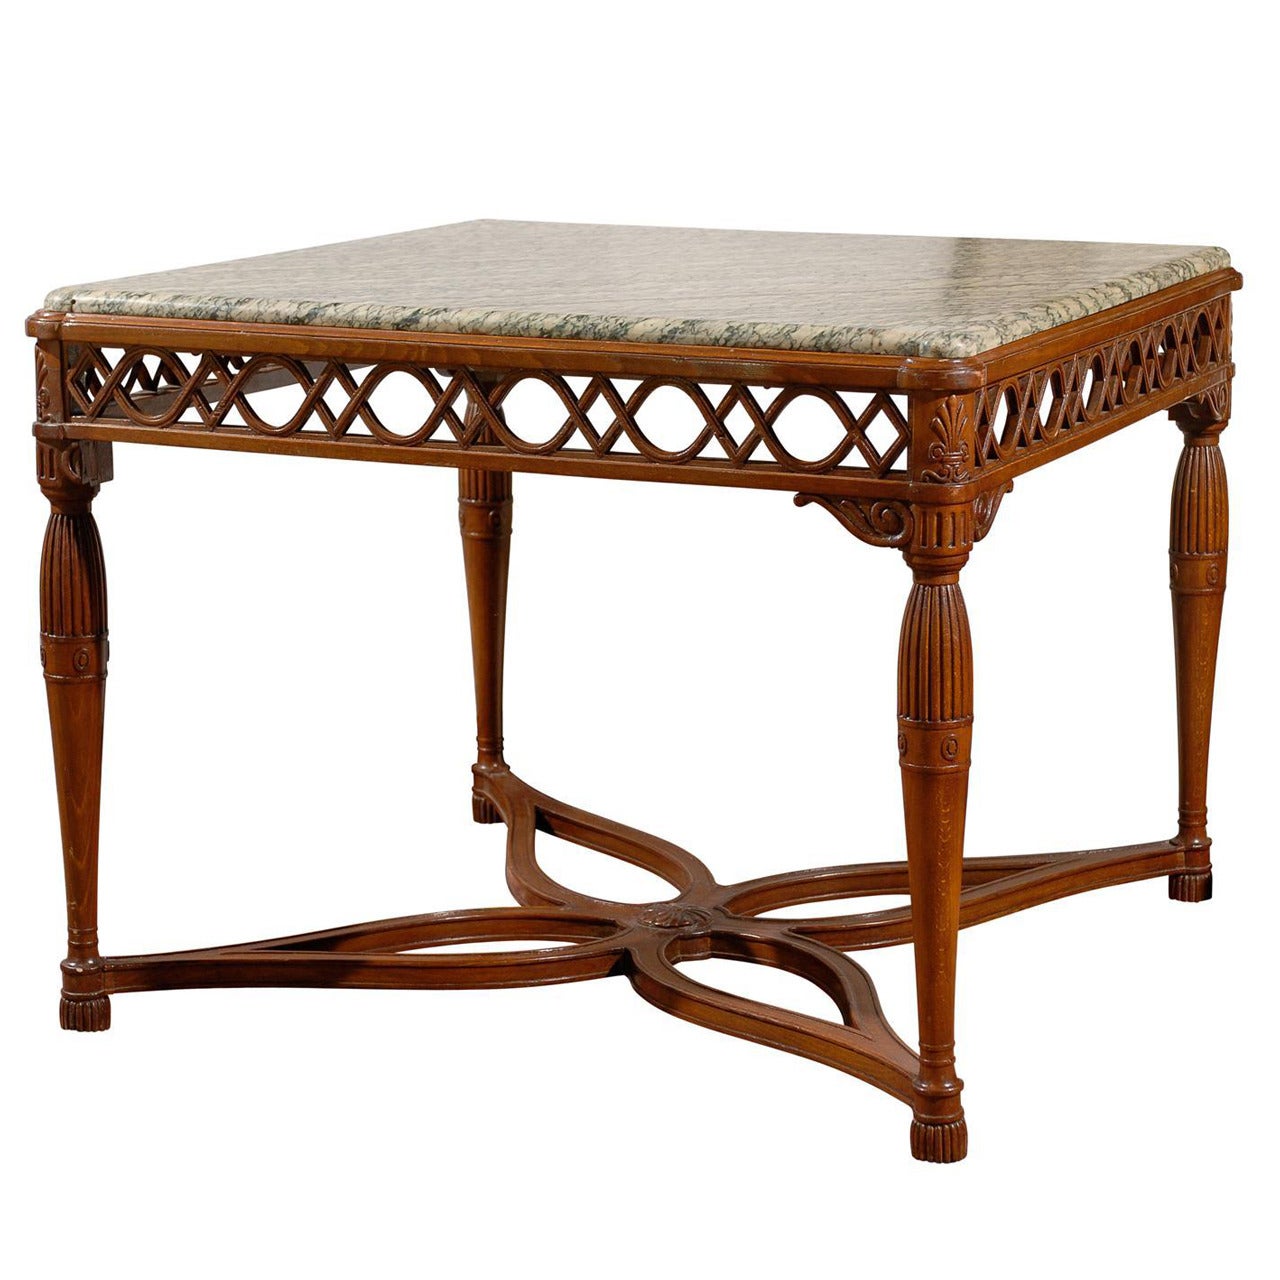 1820s Italian Walnut Marble-Top Center Table with Pierced Apron